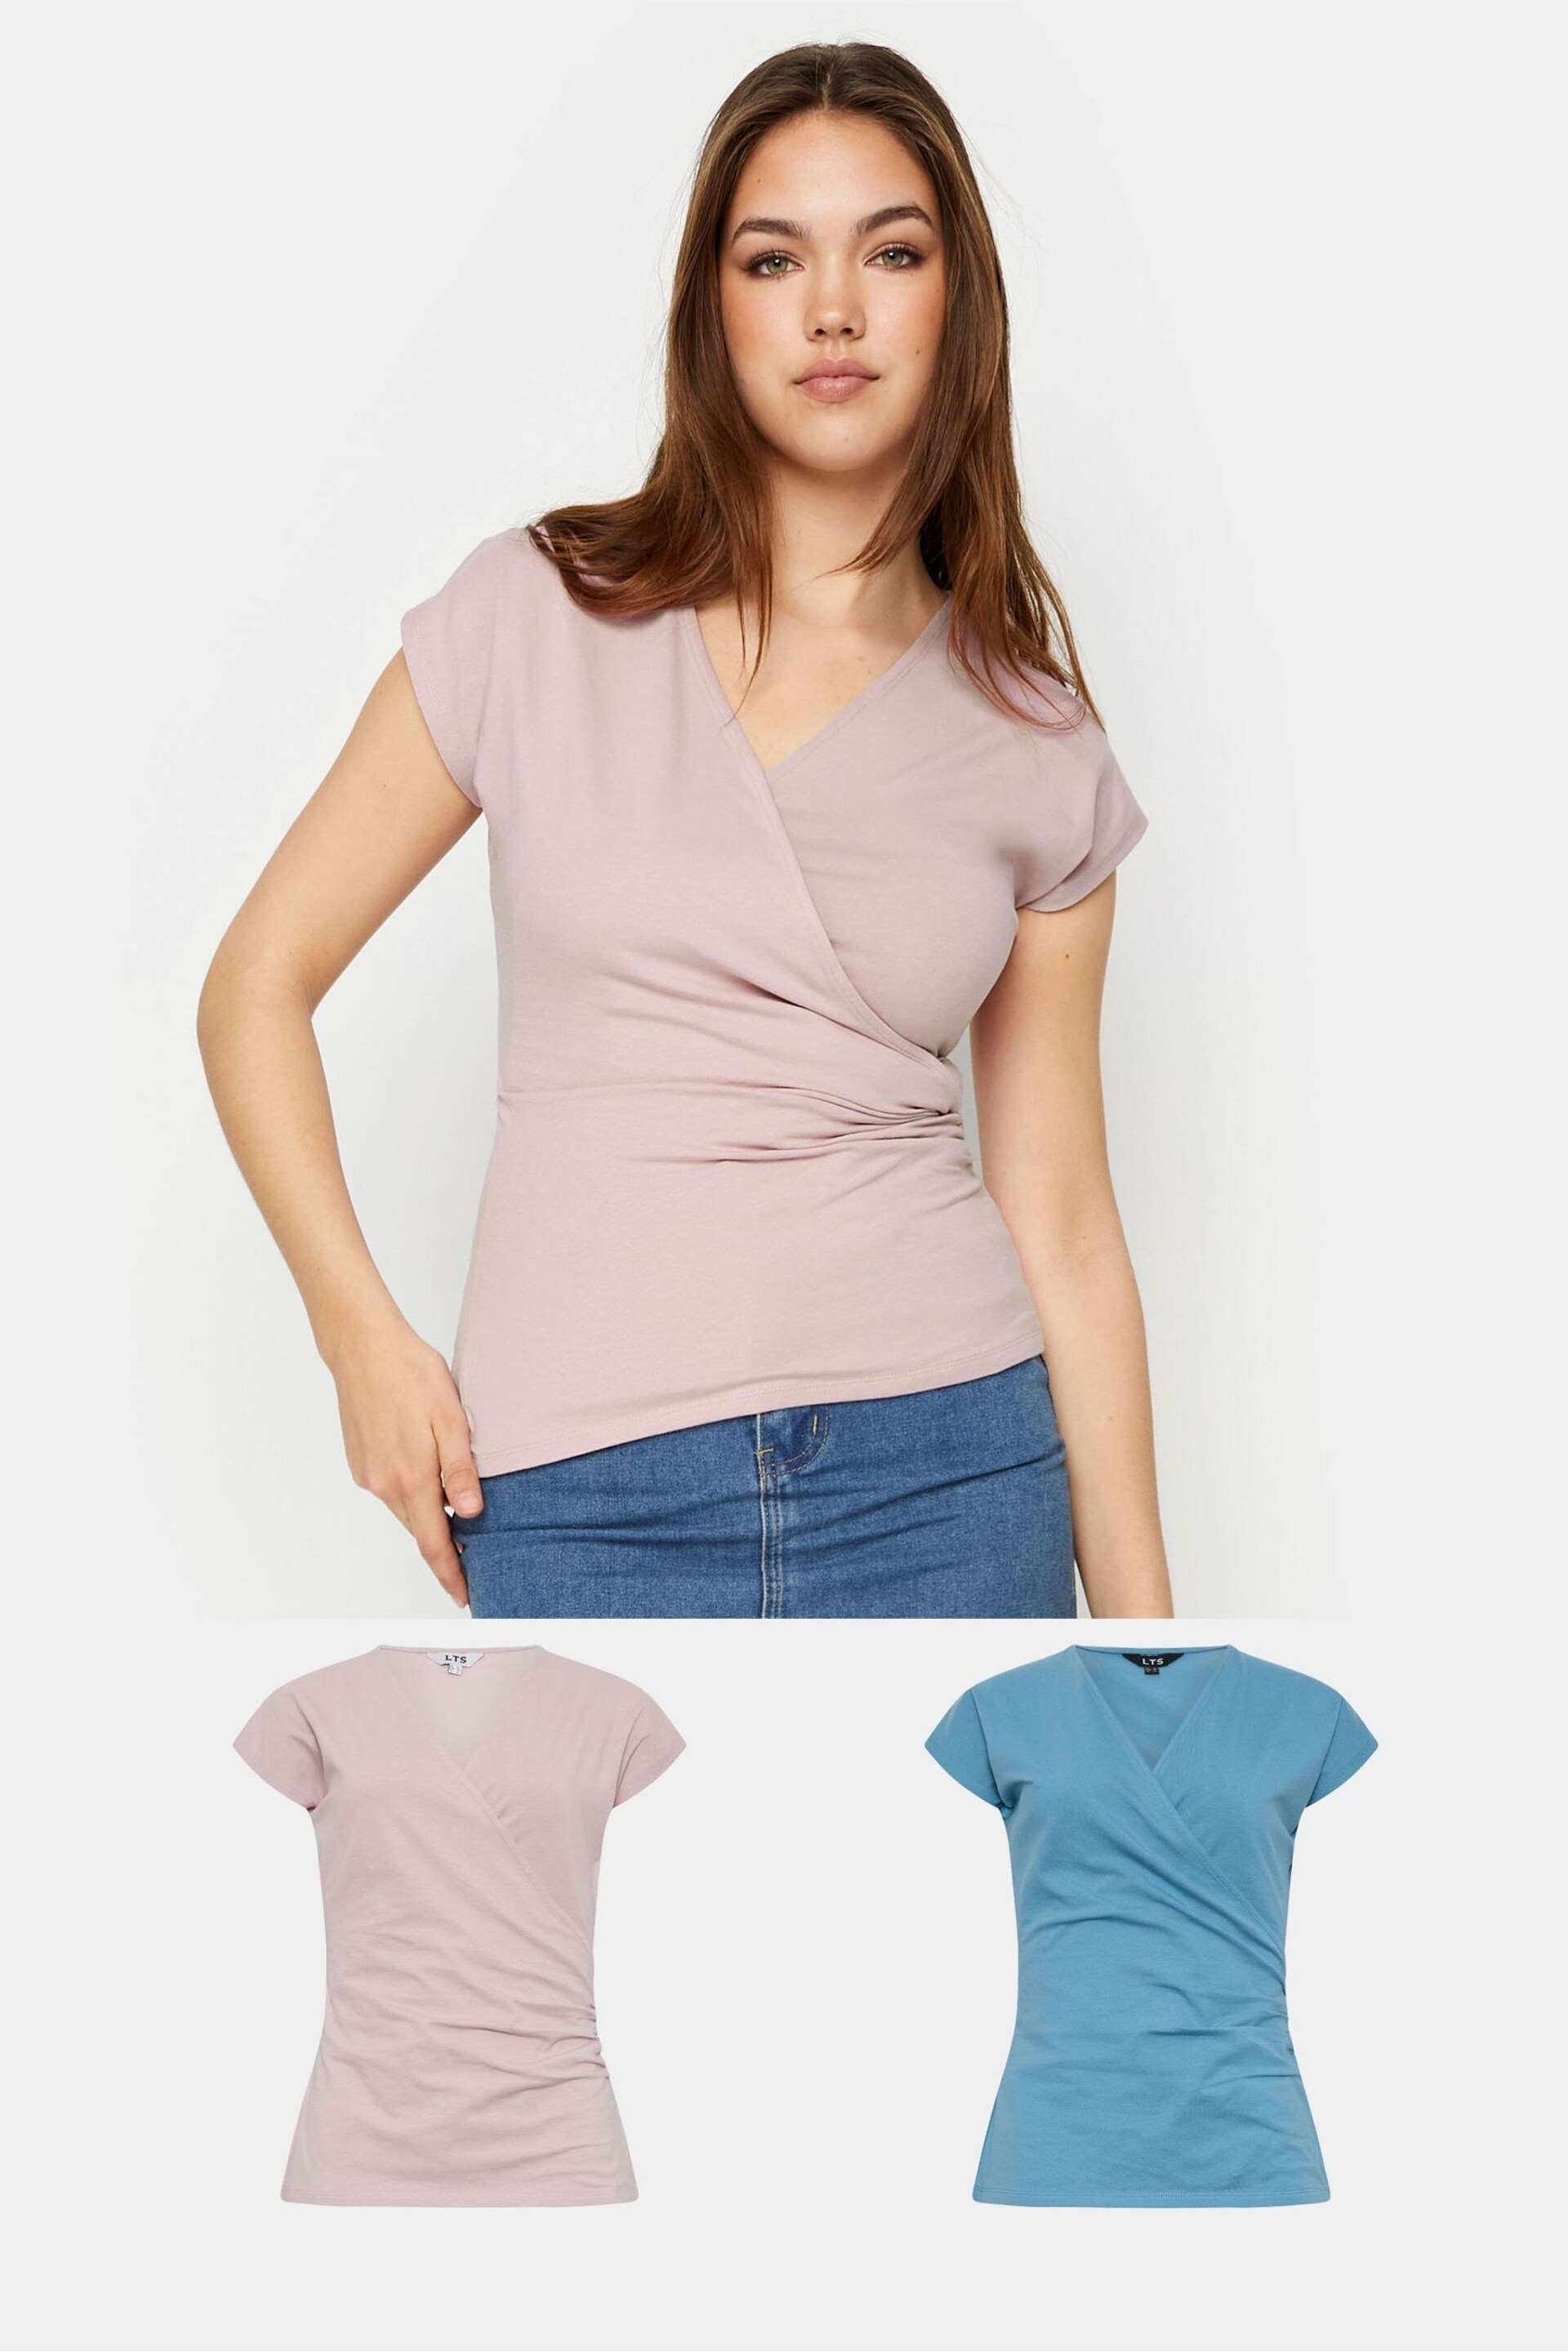 Long Tall Sally Blue Grown On Sleeve Wrap Tops 2 Pack - Image 1 of 1